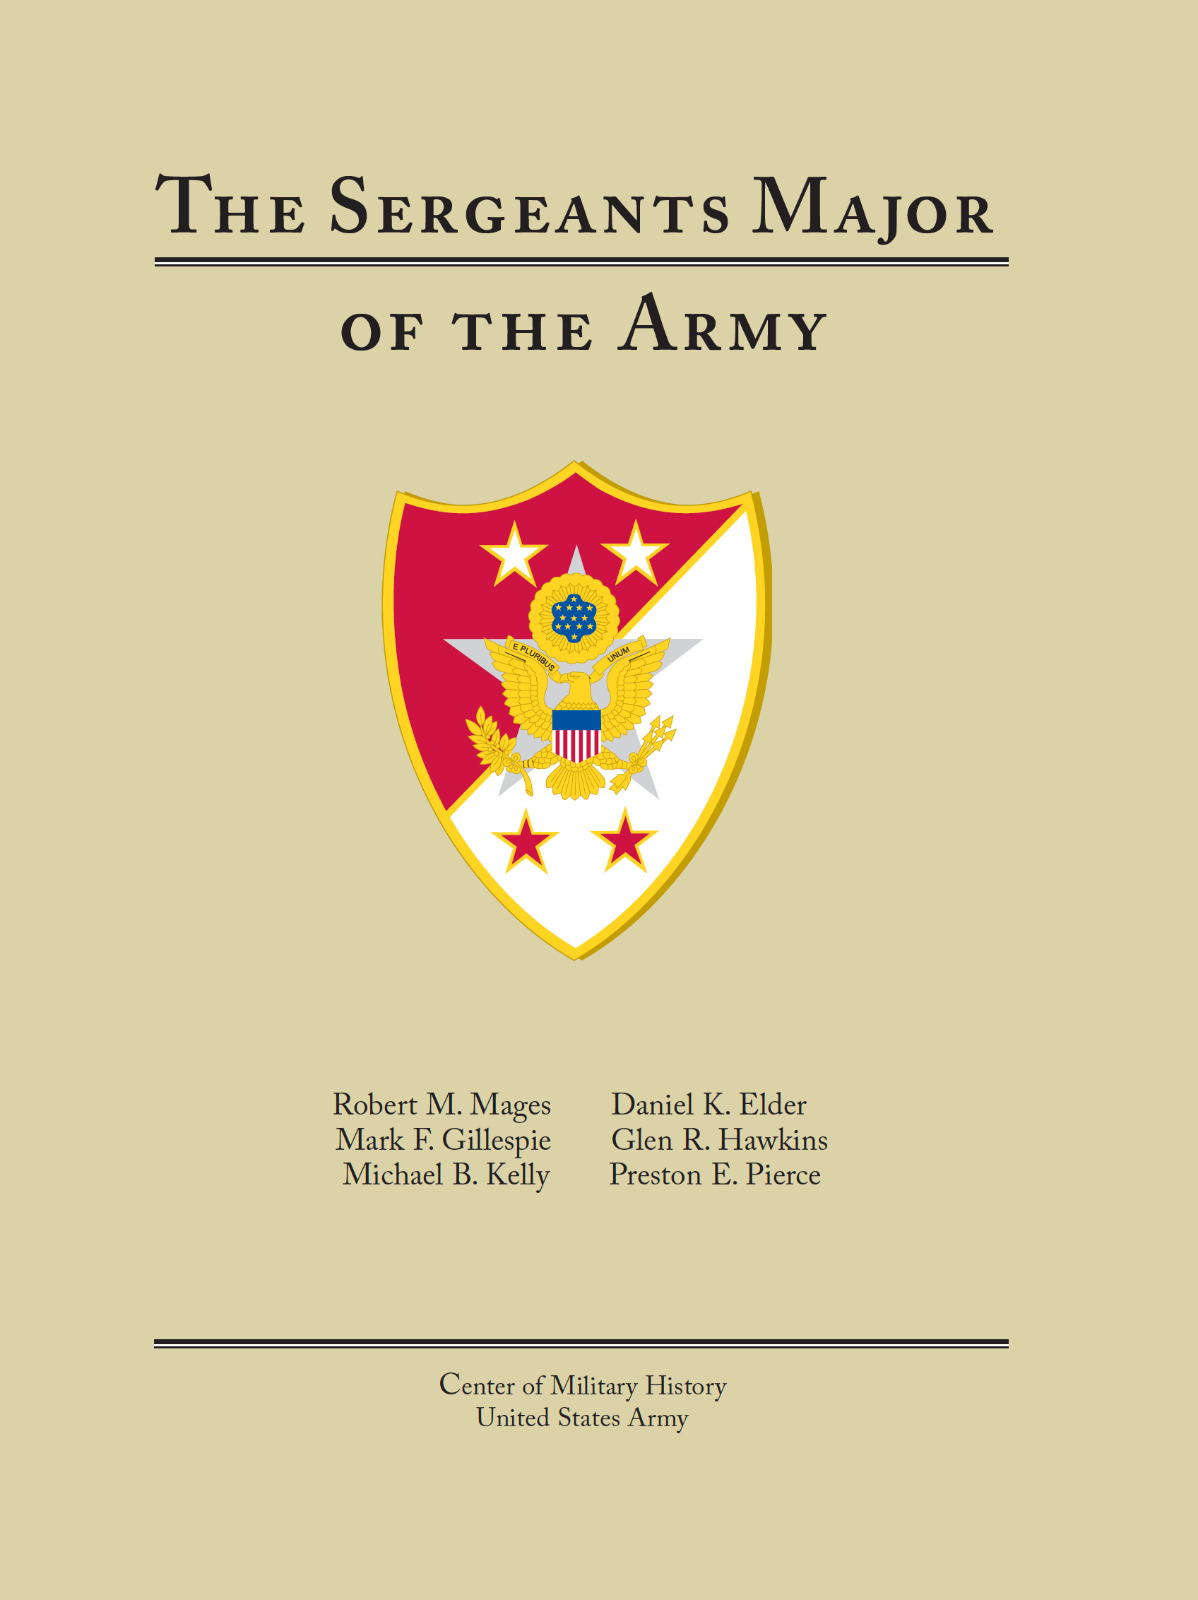 262 Page 1995 2013 The Sergeants Major of the Army History Book on Data CD